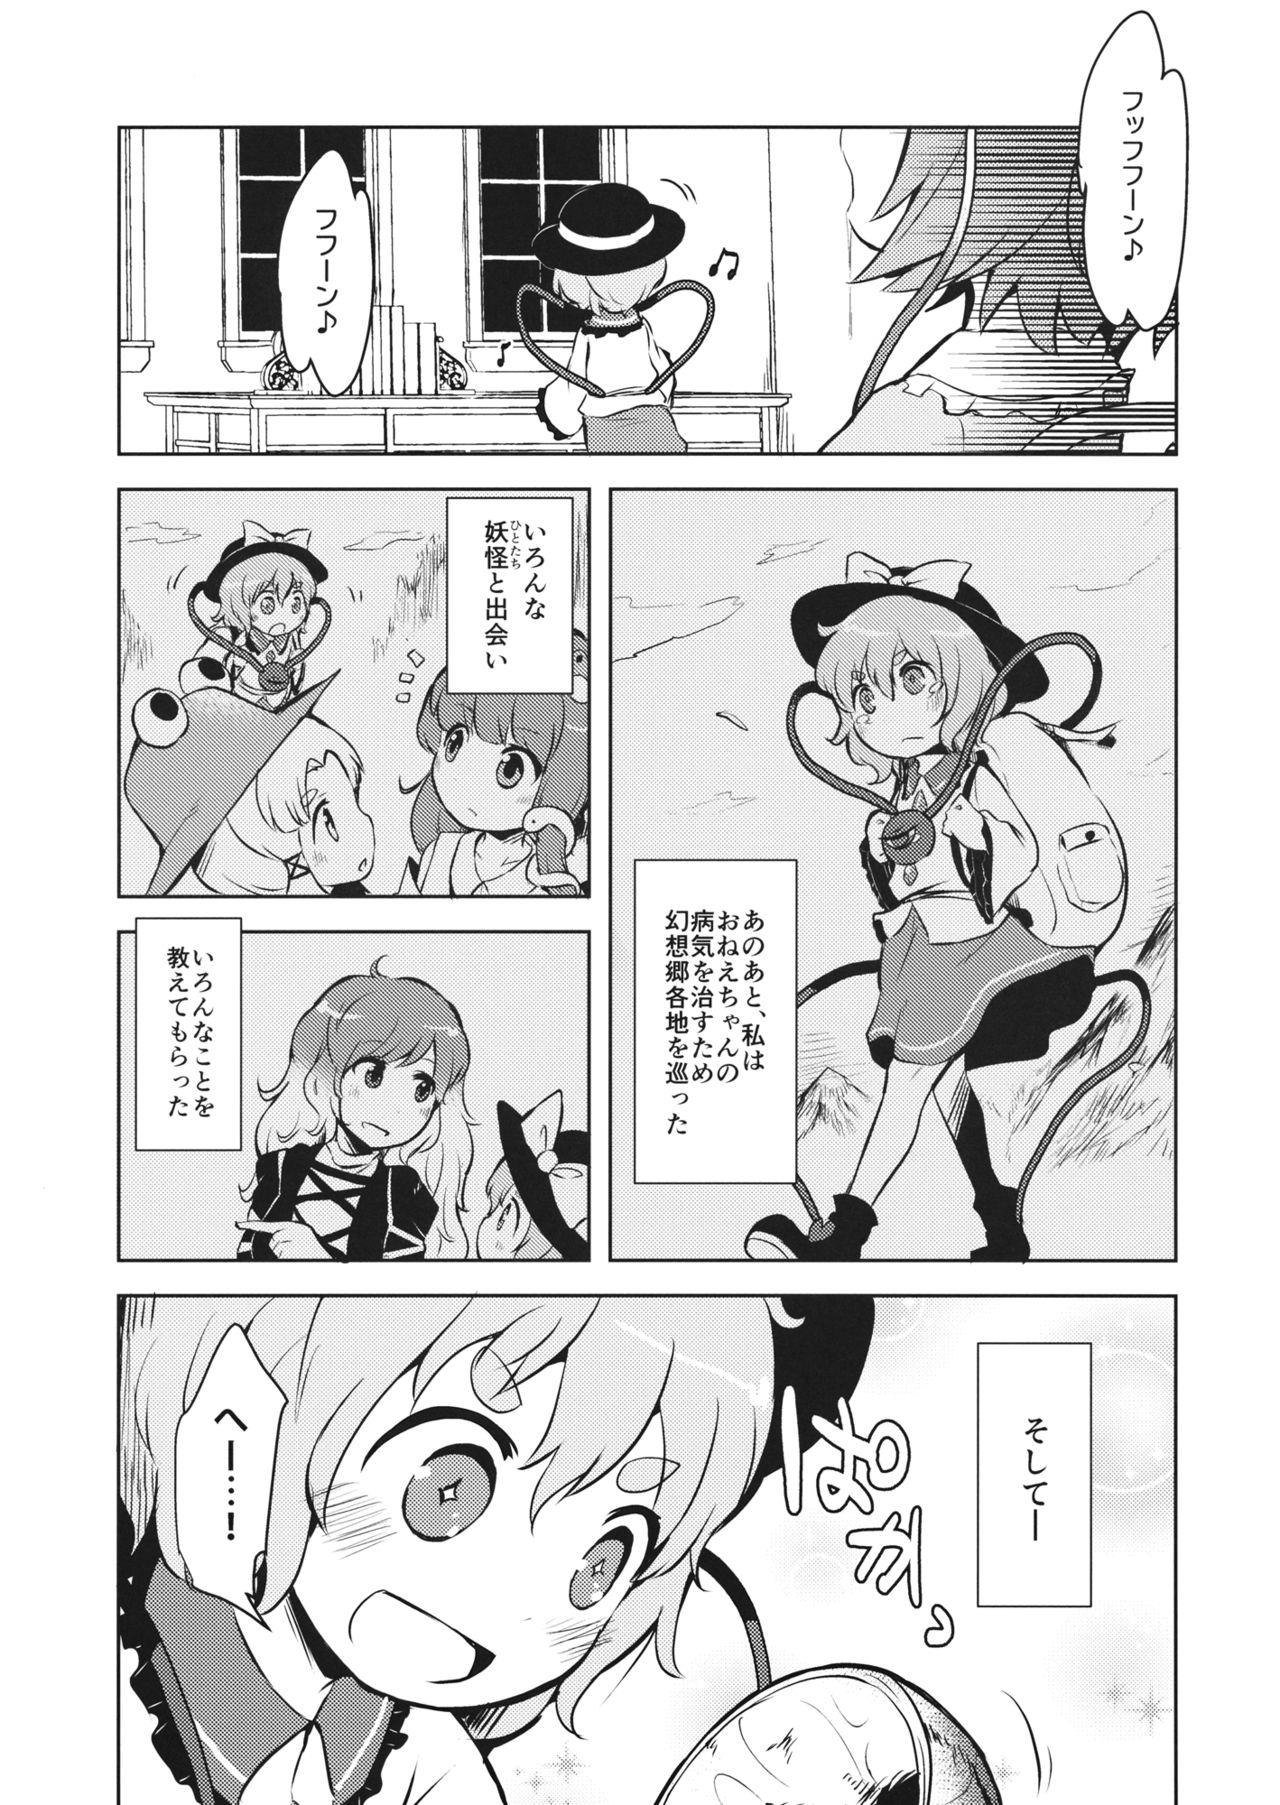 Best Blowjobs Ever FREAKS OUT! - Touhou project Japan - Page 8